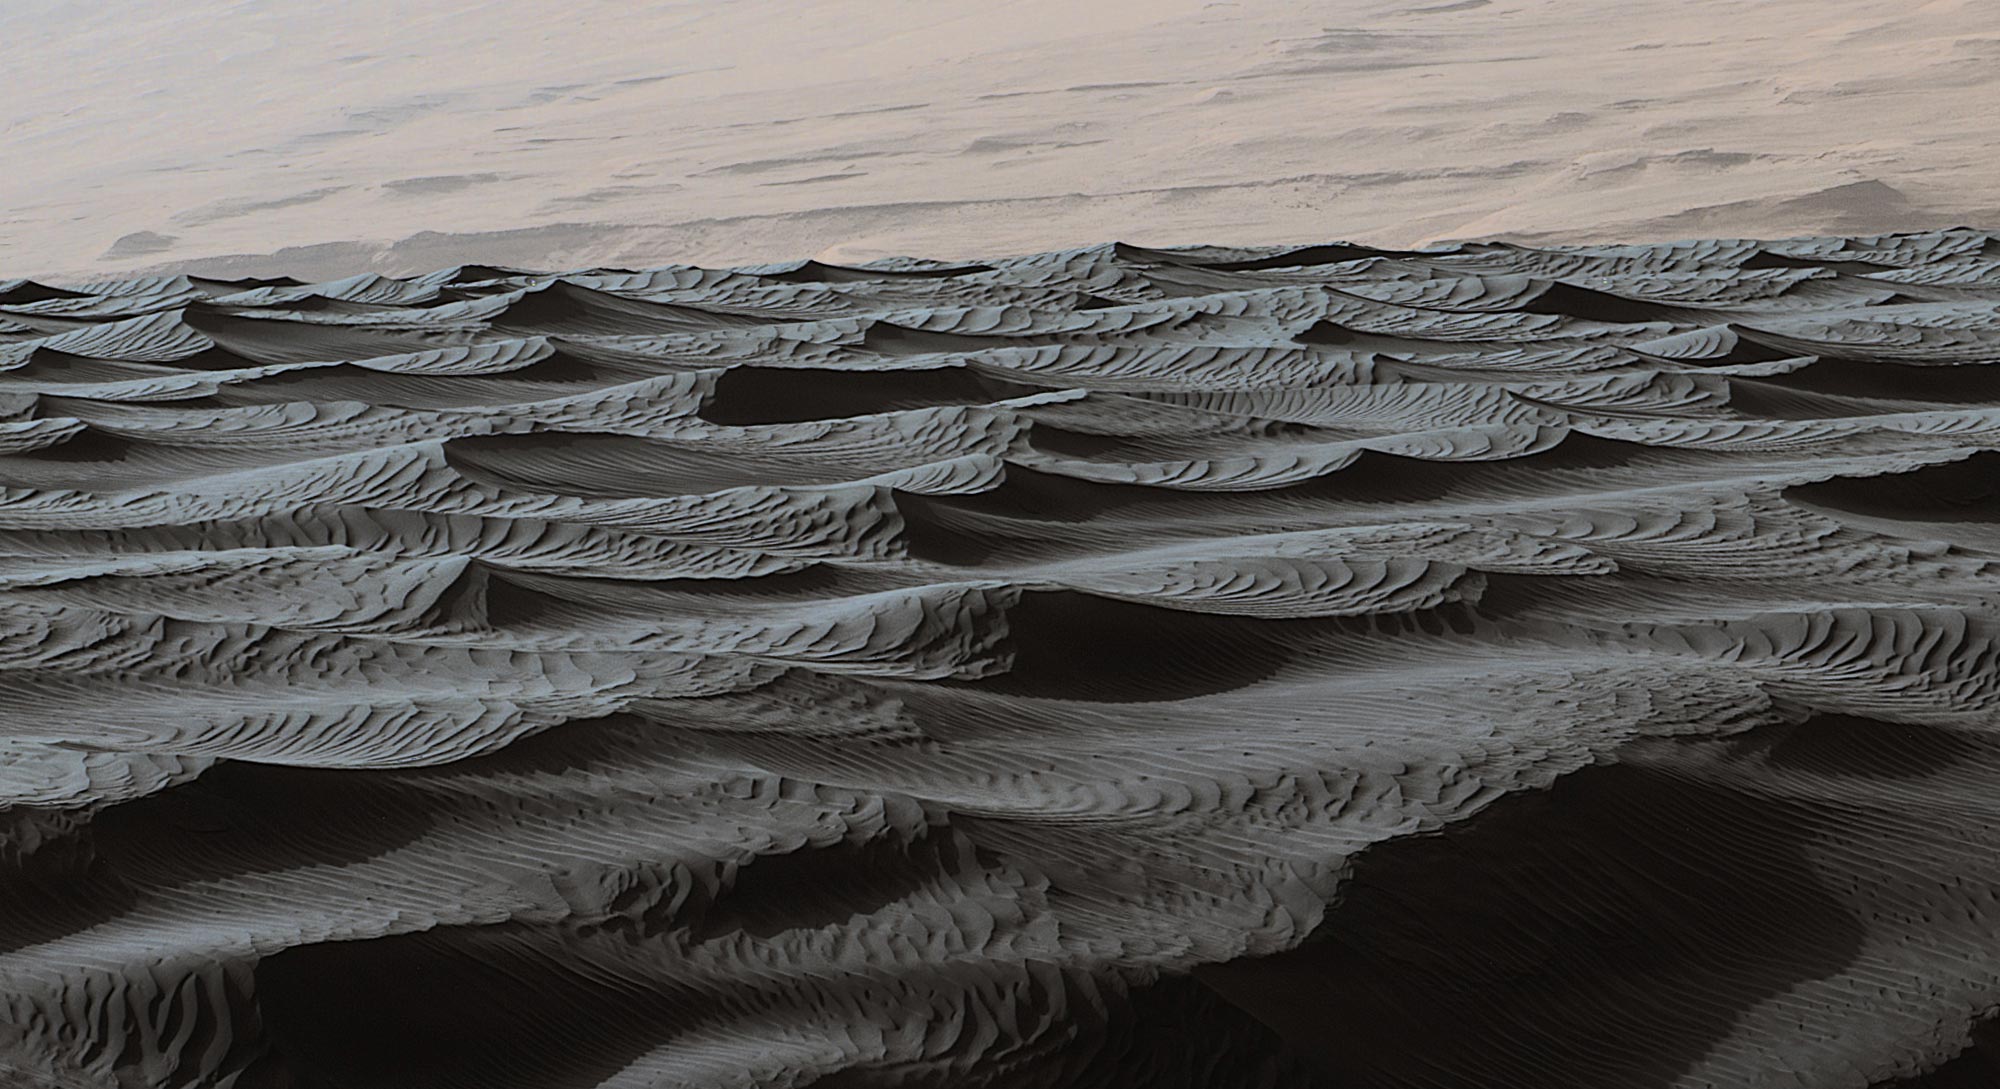 New Theory May Have Solved the Fascinating Mystery of Sand Ripples on Mars